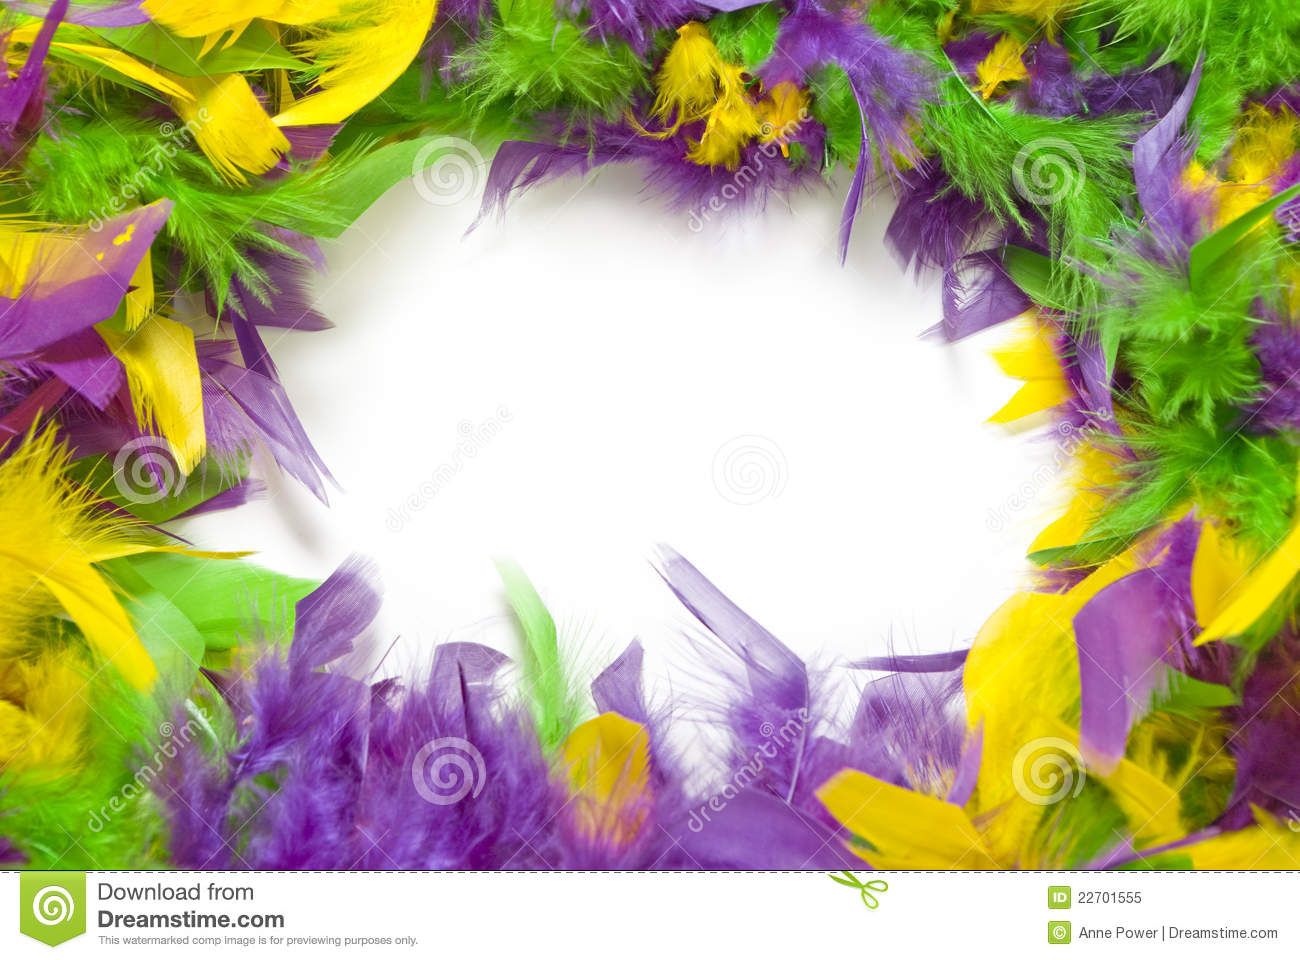 Field Of White Bordered Or Framed By Feathers In Traditional Mardi